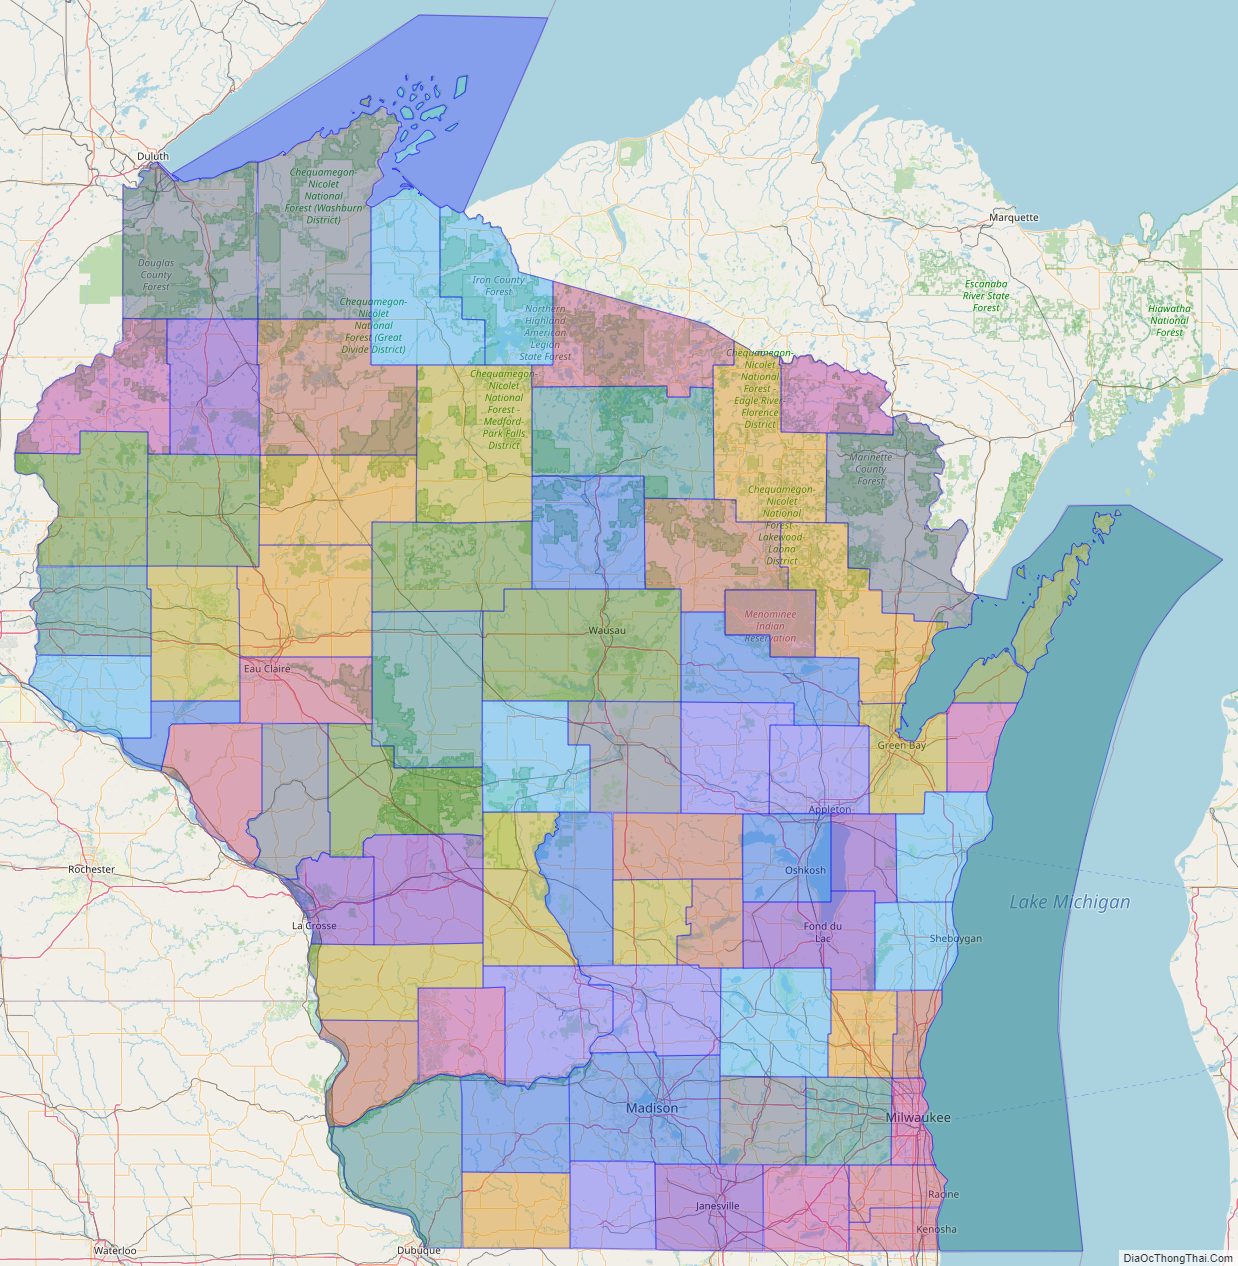 Printable - Large Scale Political Map of Wisconsin